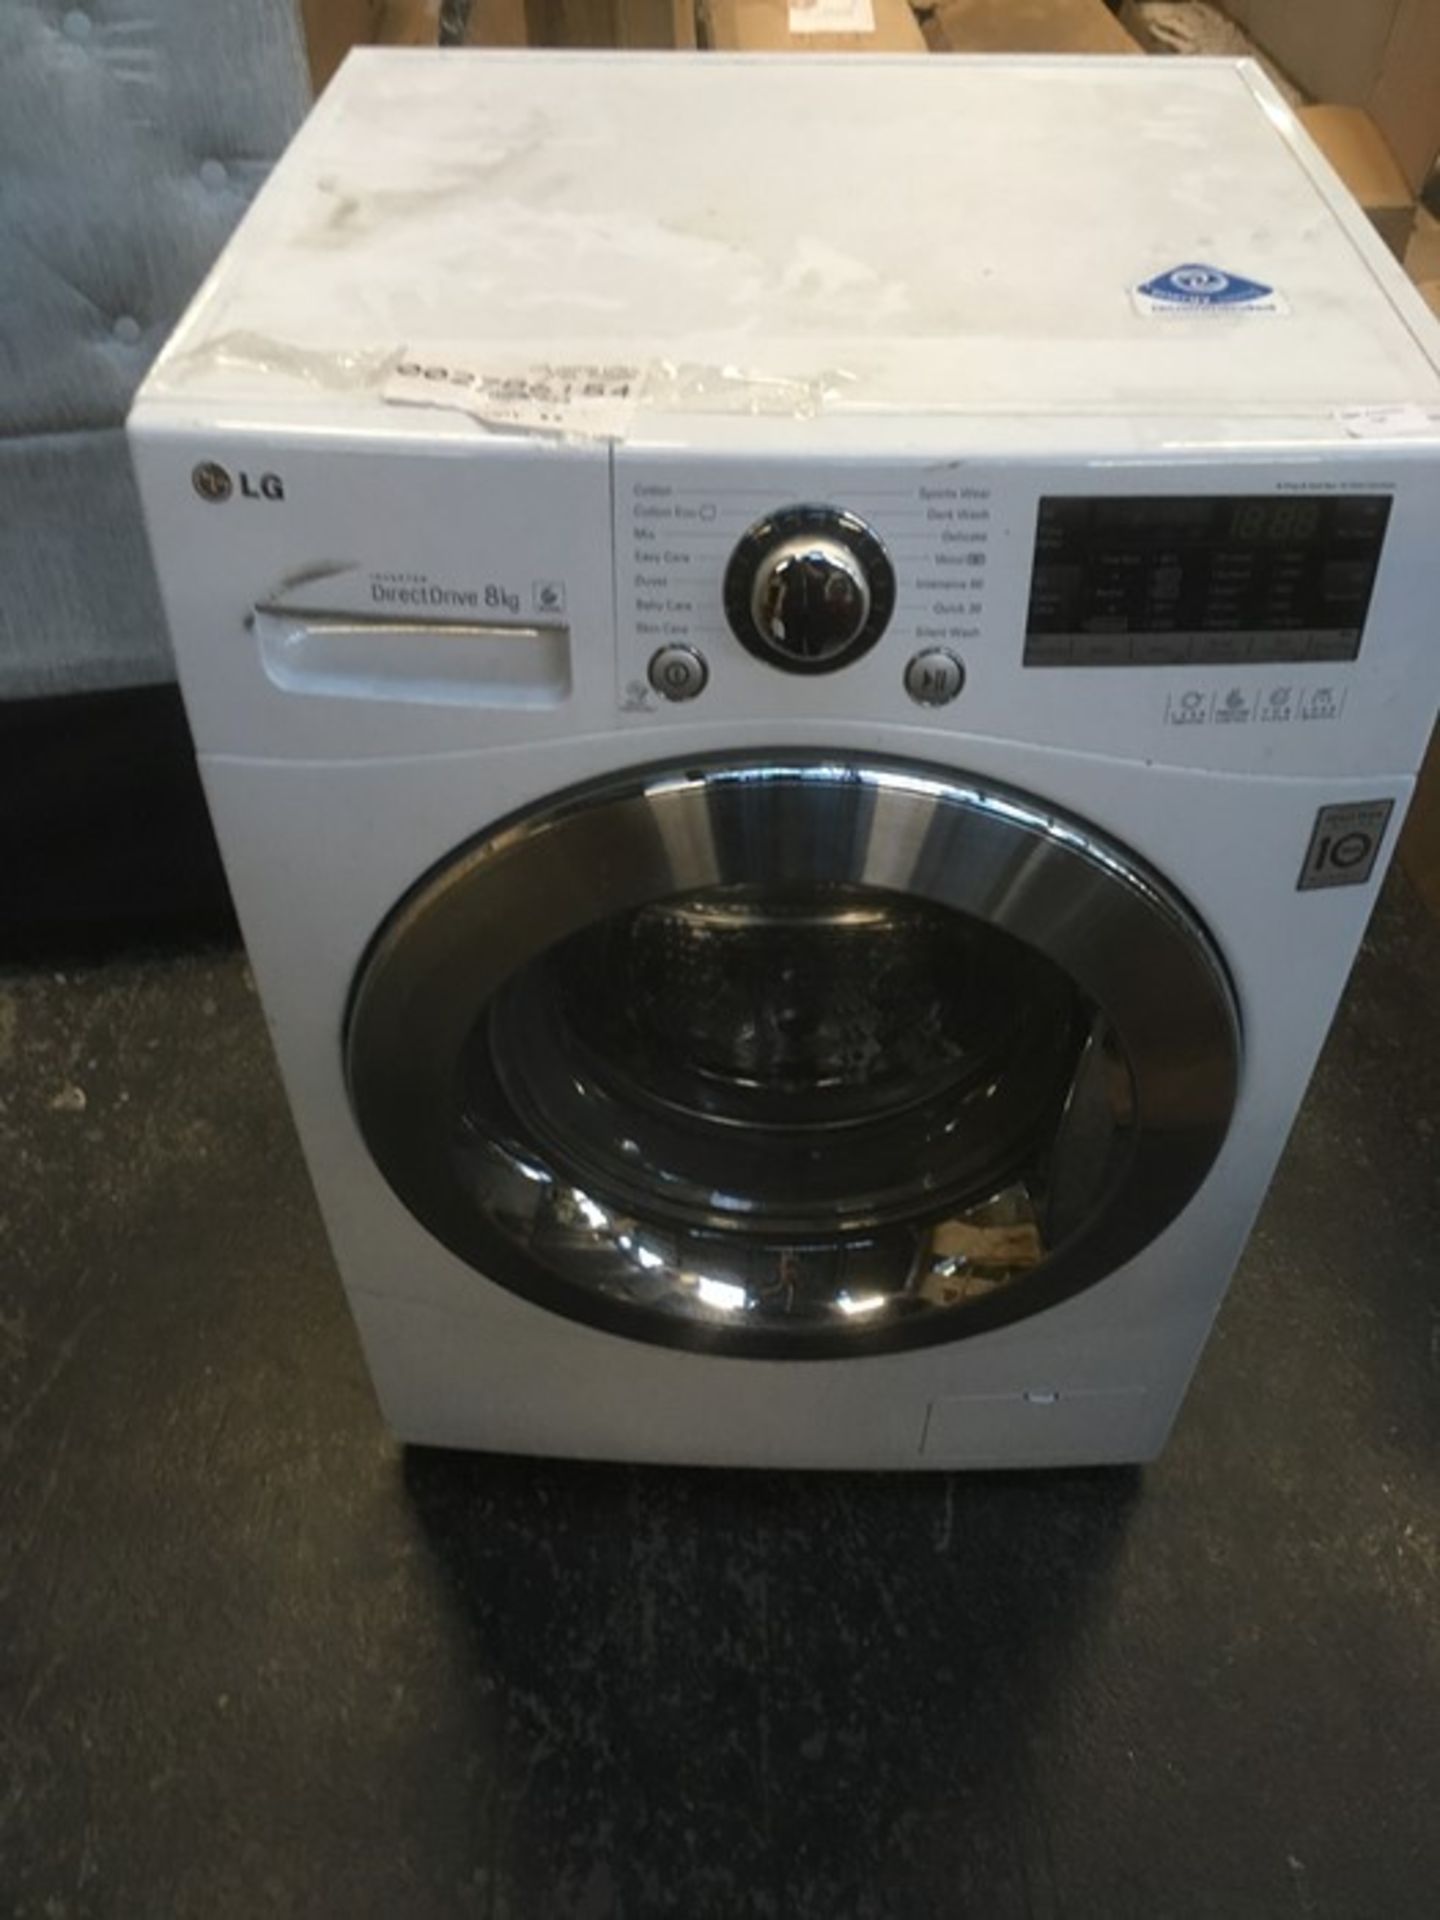 LG F14A8TDA WASHING MACHINE RRP £310 SOURCED FROM JOHN LEWIS DEPARTMENT STORES - PUBLIC VIEWING